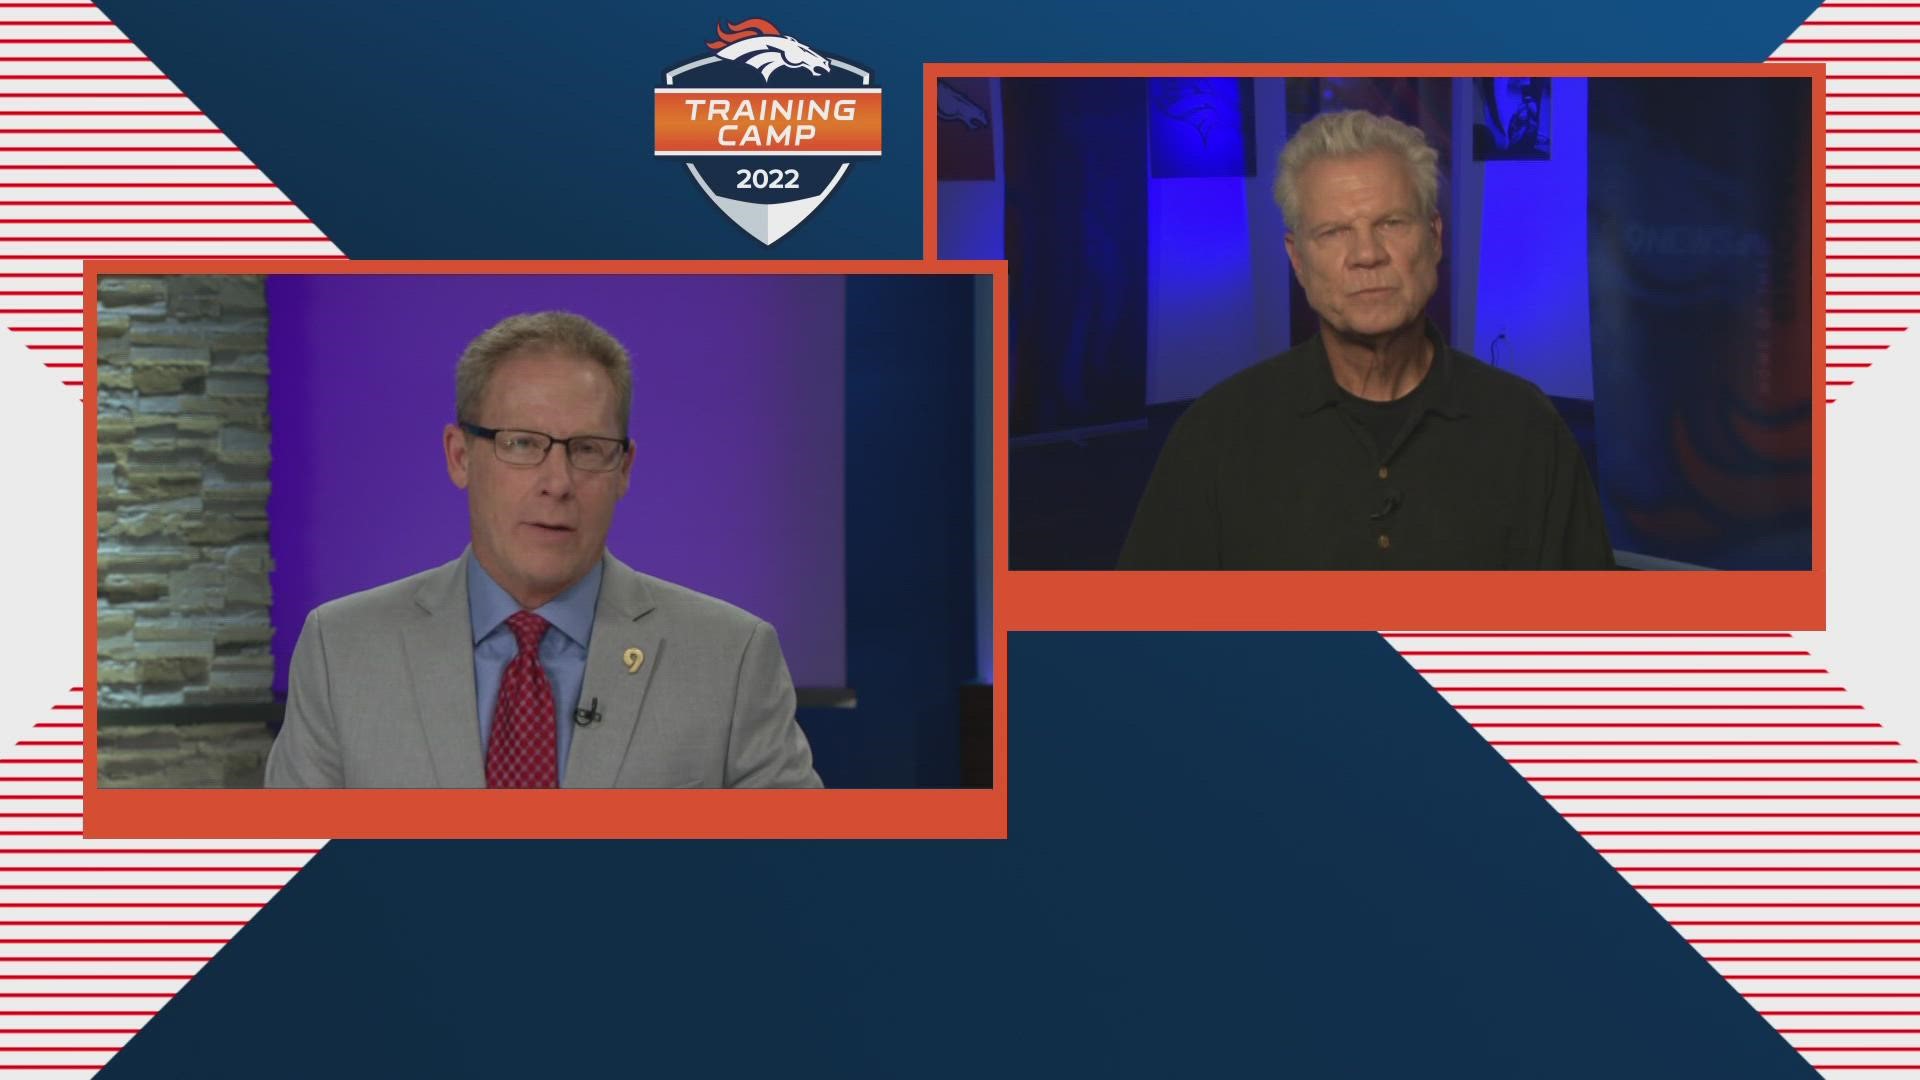 Mike Klis and Rod Mackey provide an update following the second practice of 2022 Denver Broncos training camp.